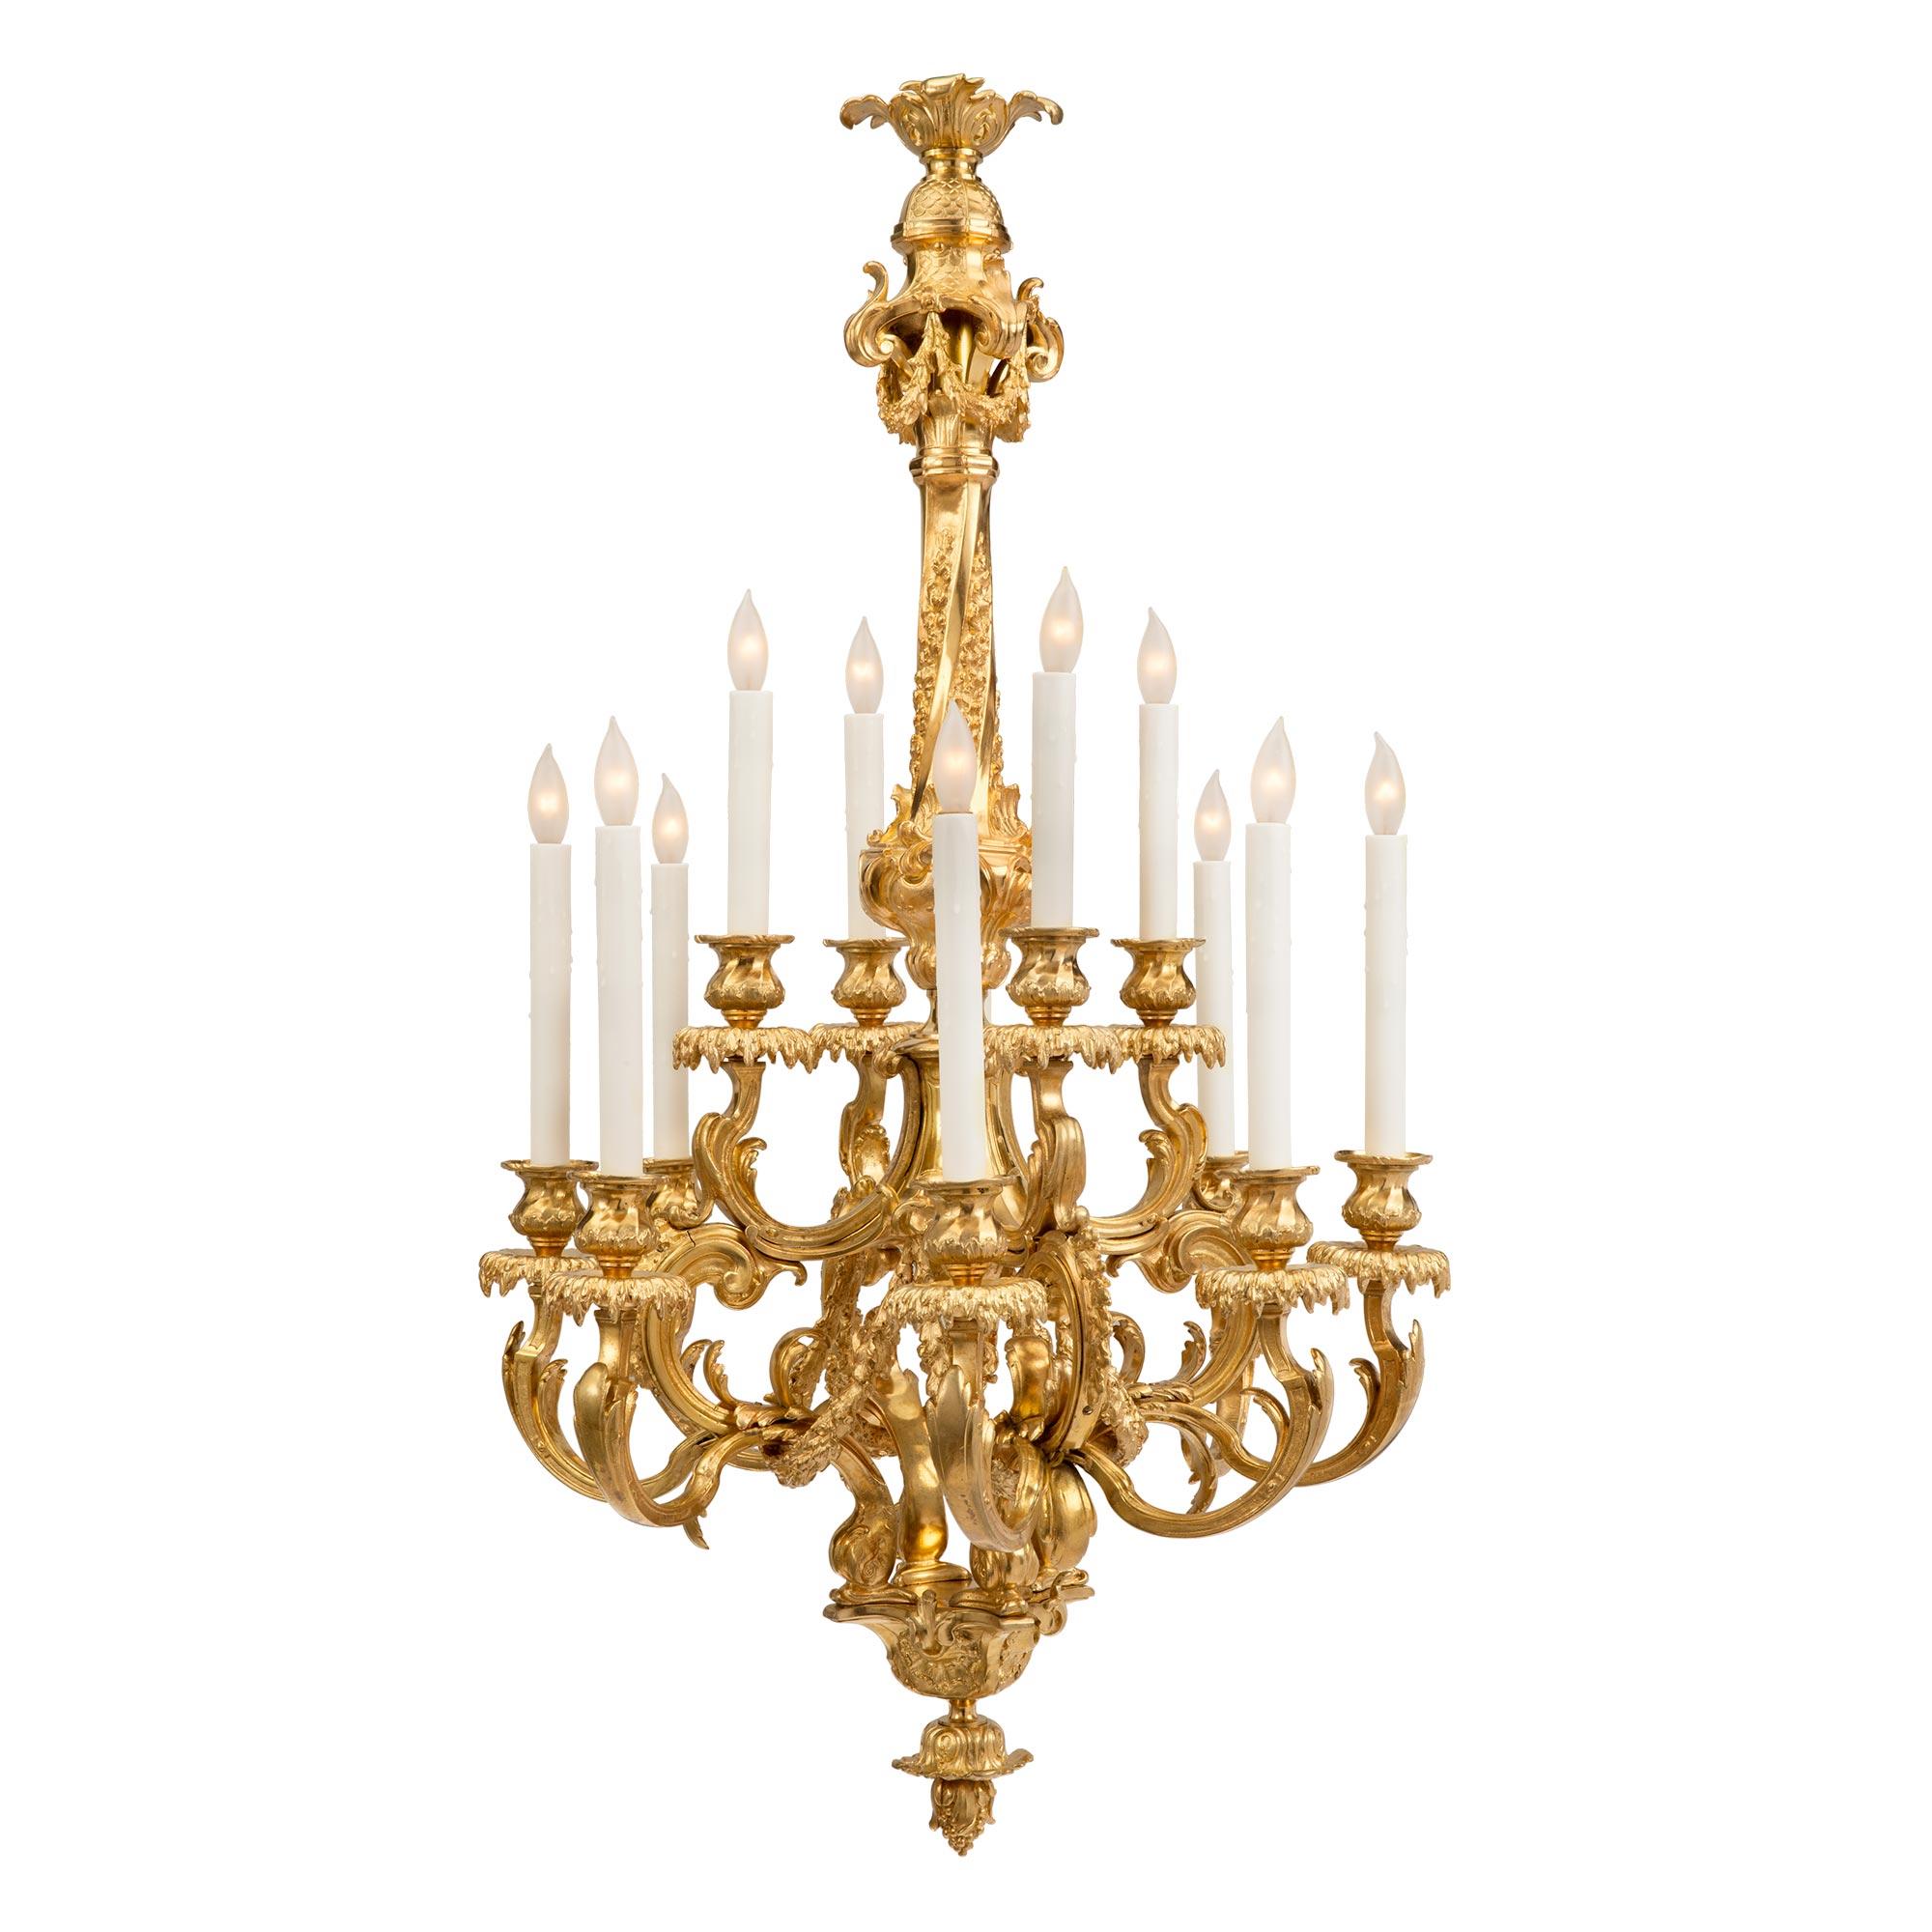 A stunning French 19th century Louis XV st. ormolu twelve light chandelier. The chandelier is centered by a striking inverted bottom acorn finial below four richly chased dolphins. Branching out from the beautiful central cage are the twelve arms